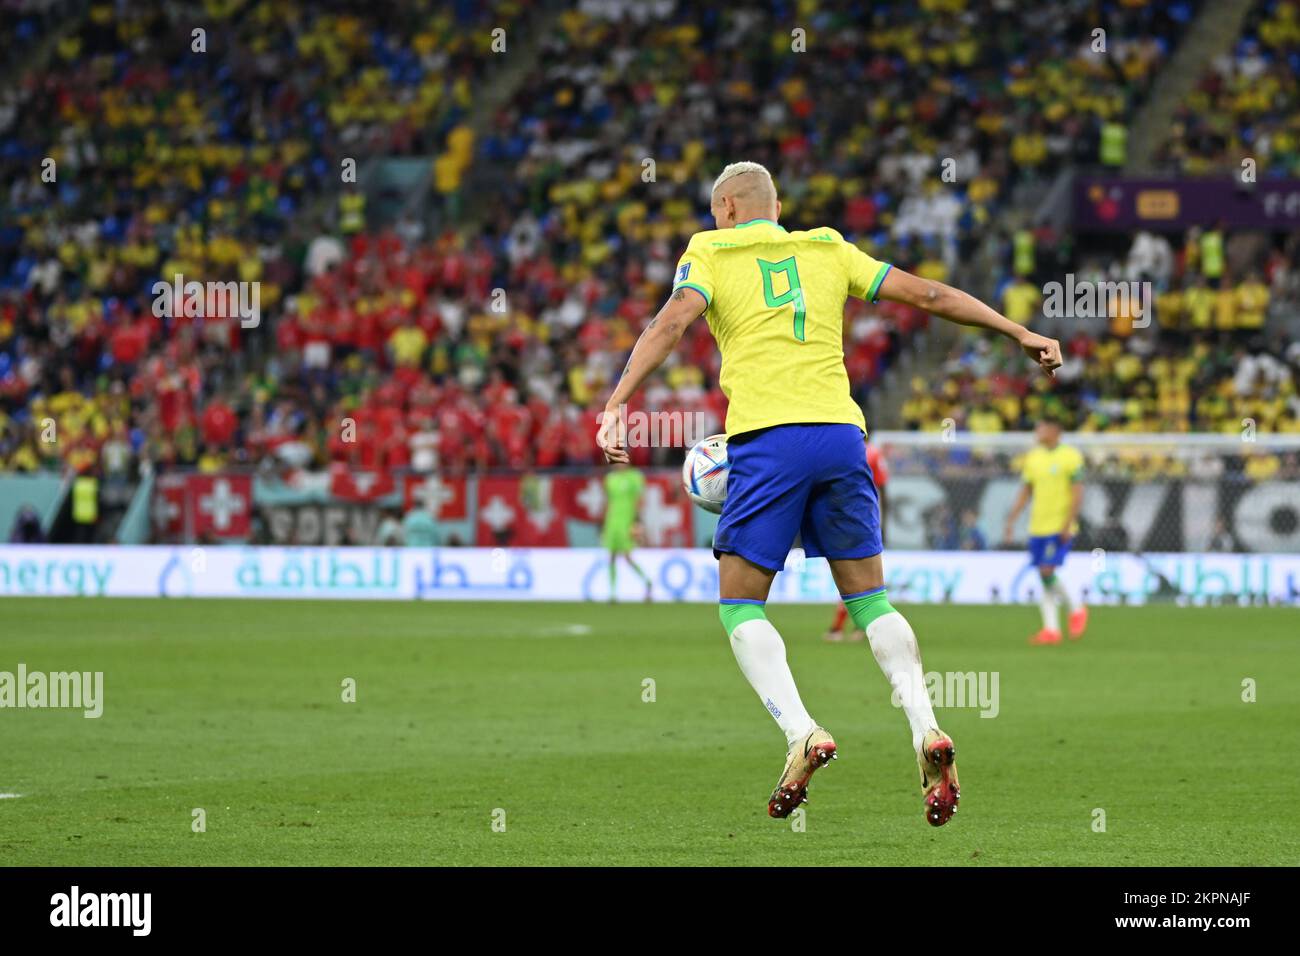 Doha, Qatar. 28th Nov, 2022. Richarlison of Brazil during a match between Brazil and Switzerland, valid for the group stage of the World Cup, held at 974 Stadium in Doha, Qatar. Credit: Richard Callis/FotoArena/Alamy Live News Stock Photo